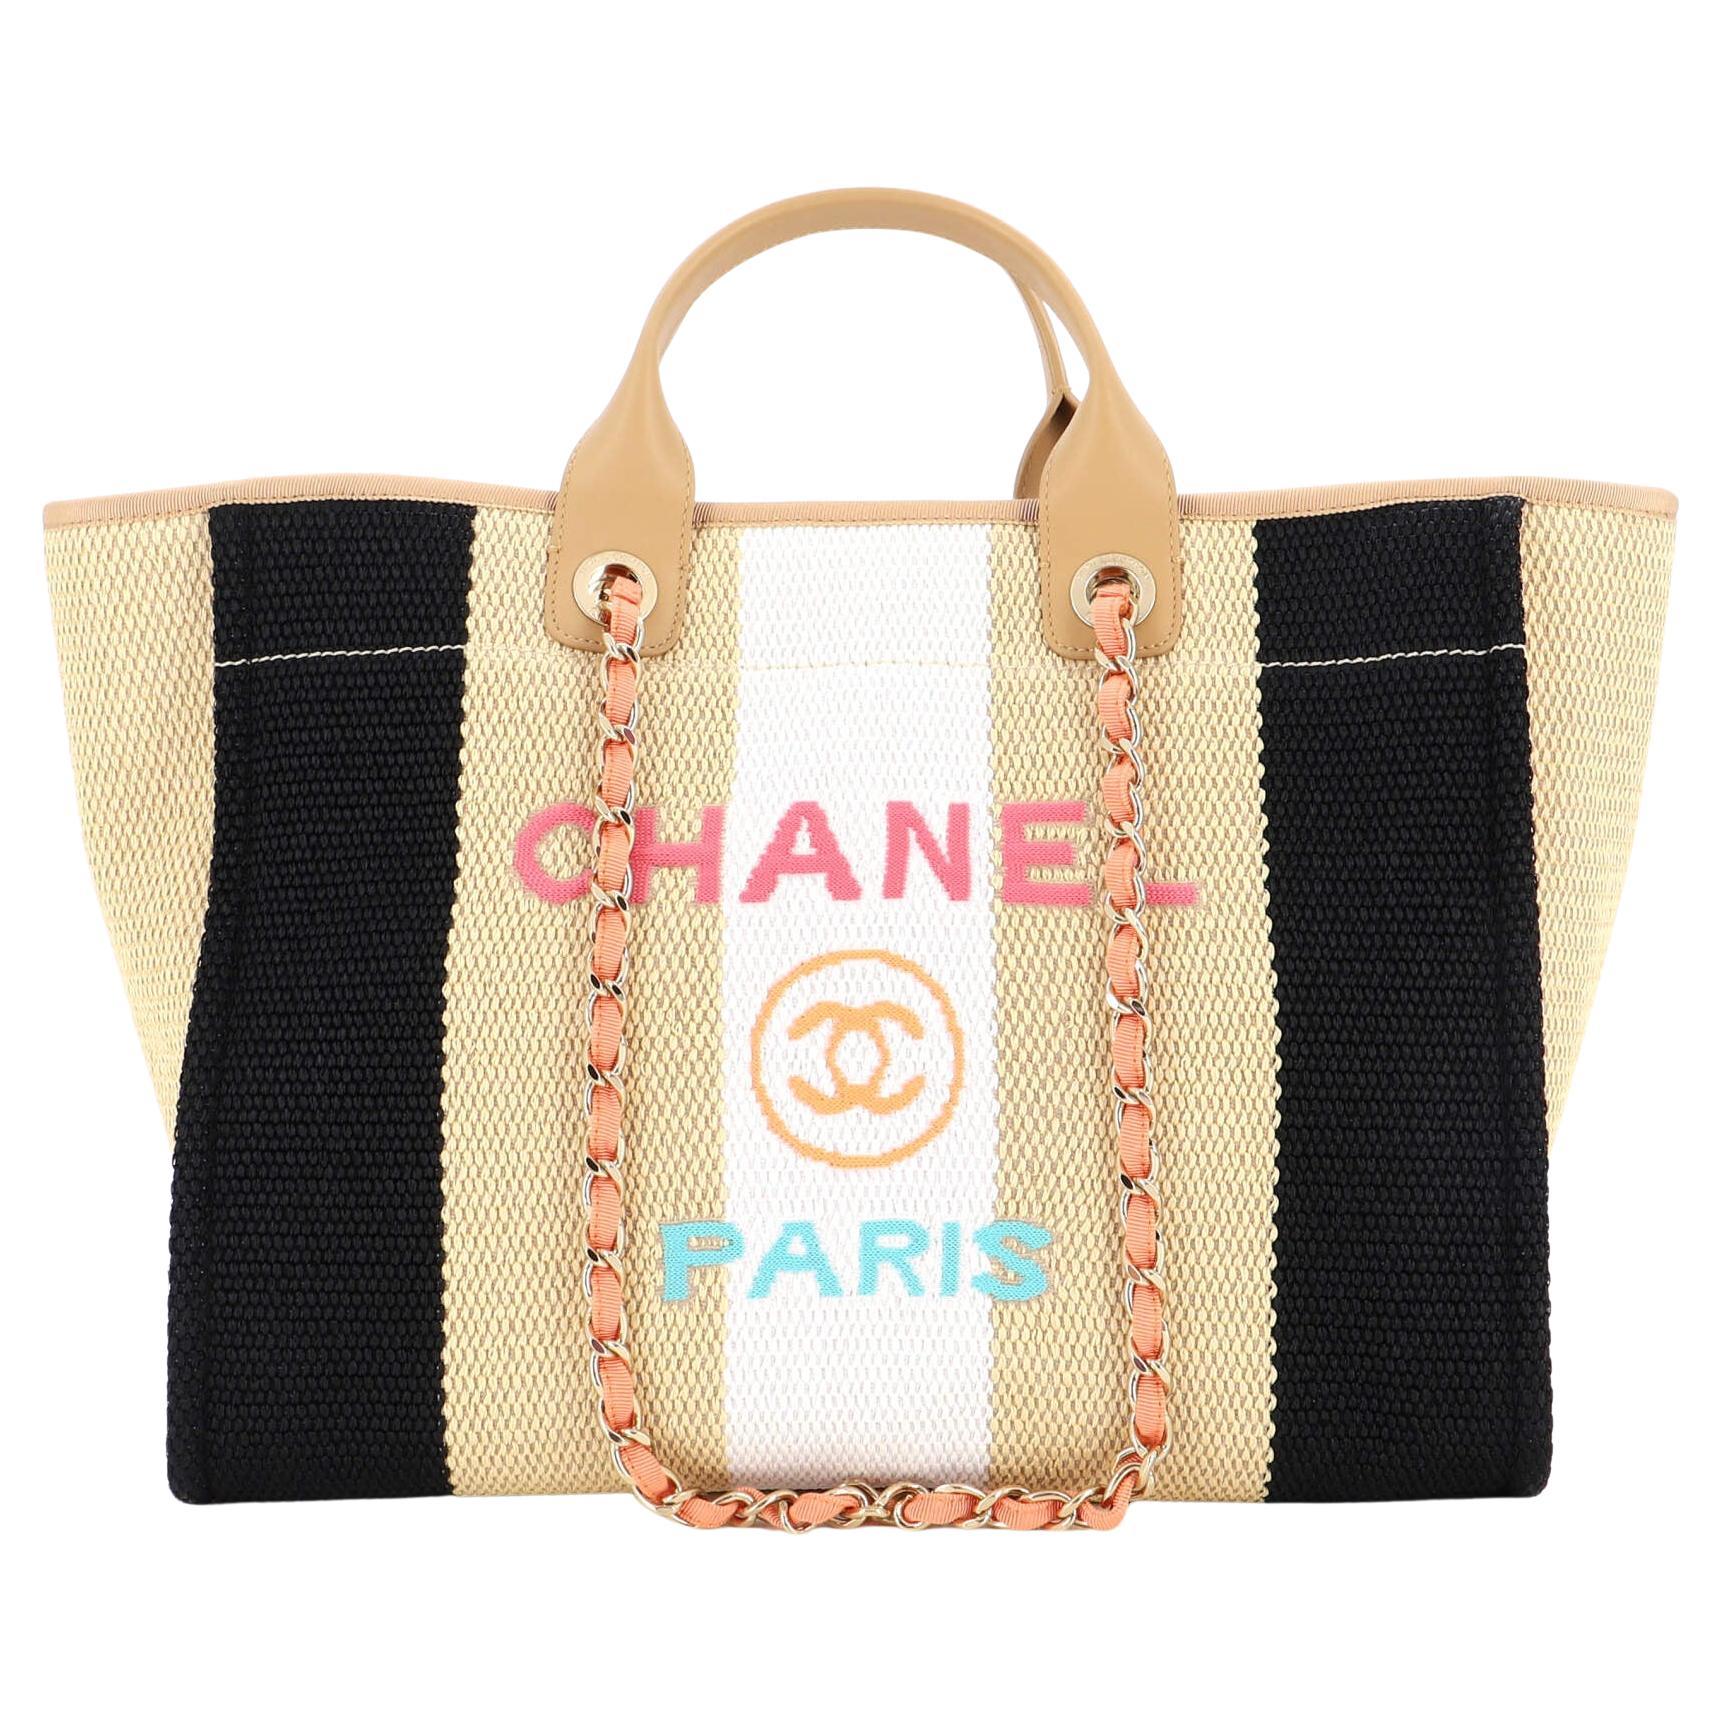 Chanel Cruise Yacht Nautical Beach Beige Coated Canvas Tote